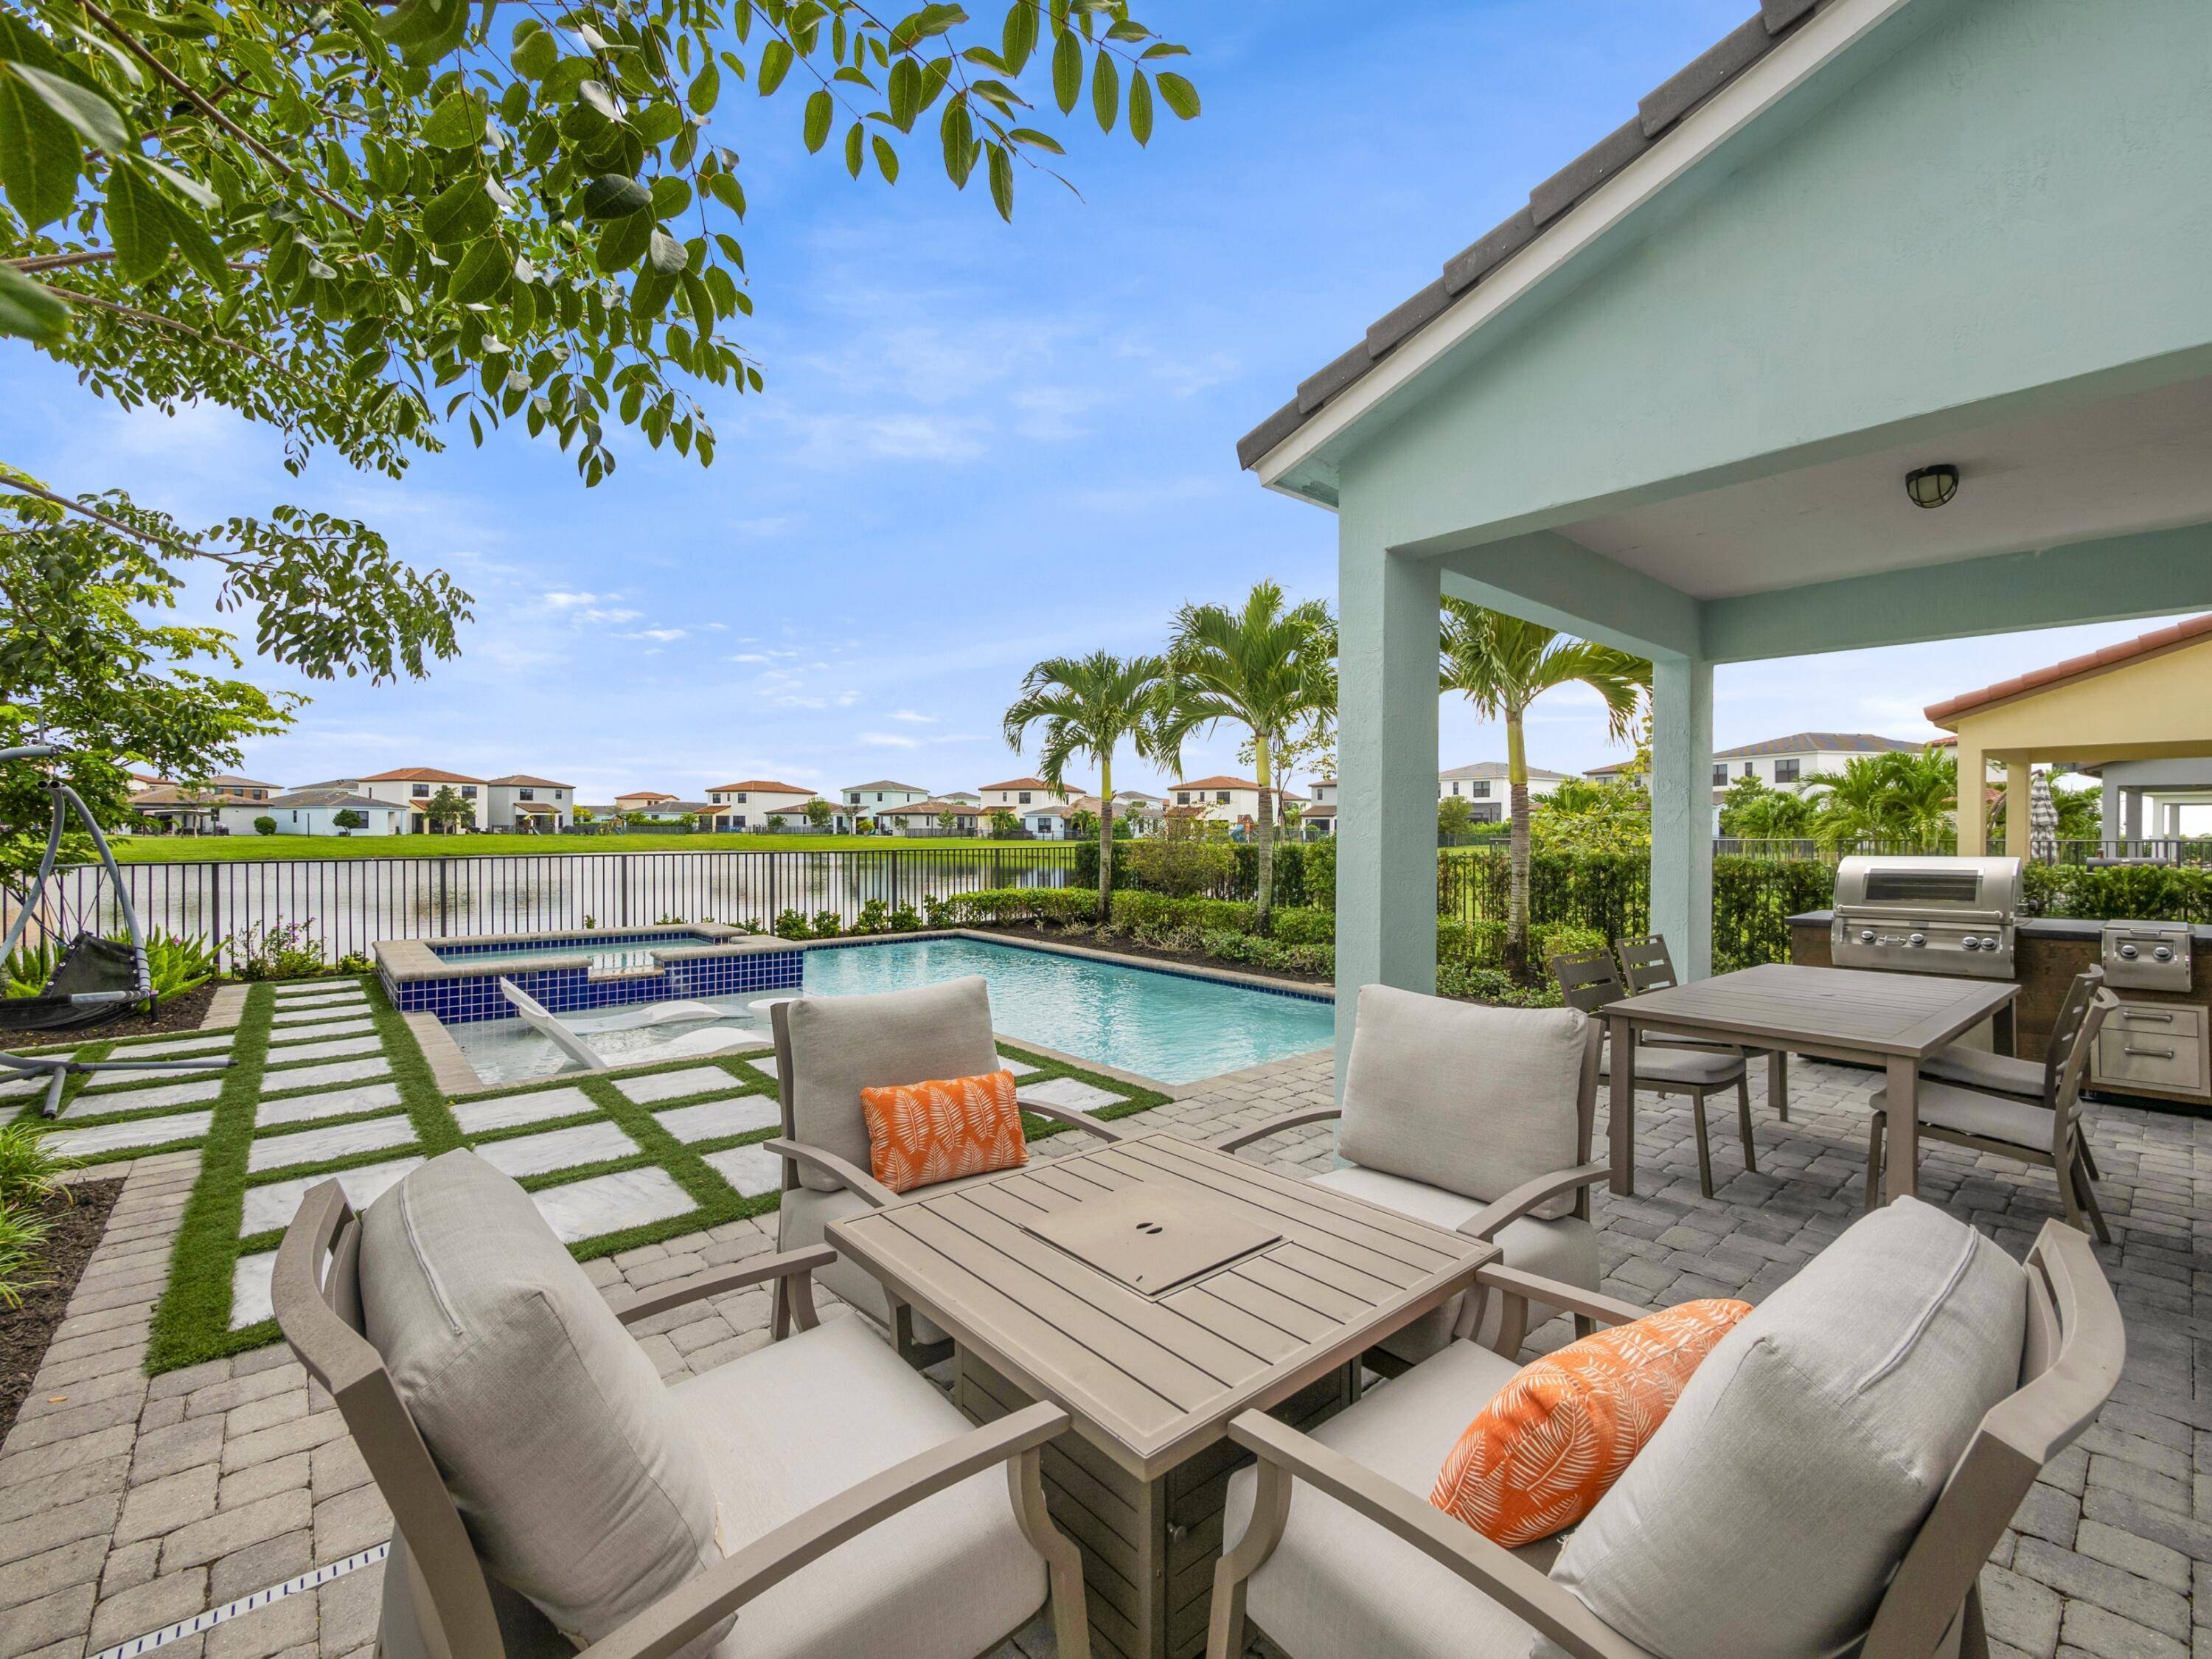 Explore the allure of this impeccably furnished waterfront Sand Dollar 4 pool home, once a prestigious Builders Model, situated in the sought after Sky Cove enclave of Westlake.